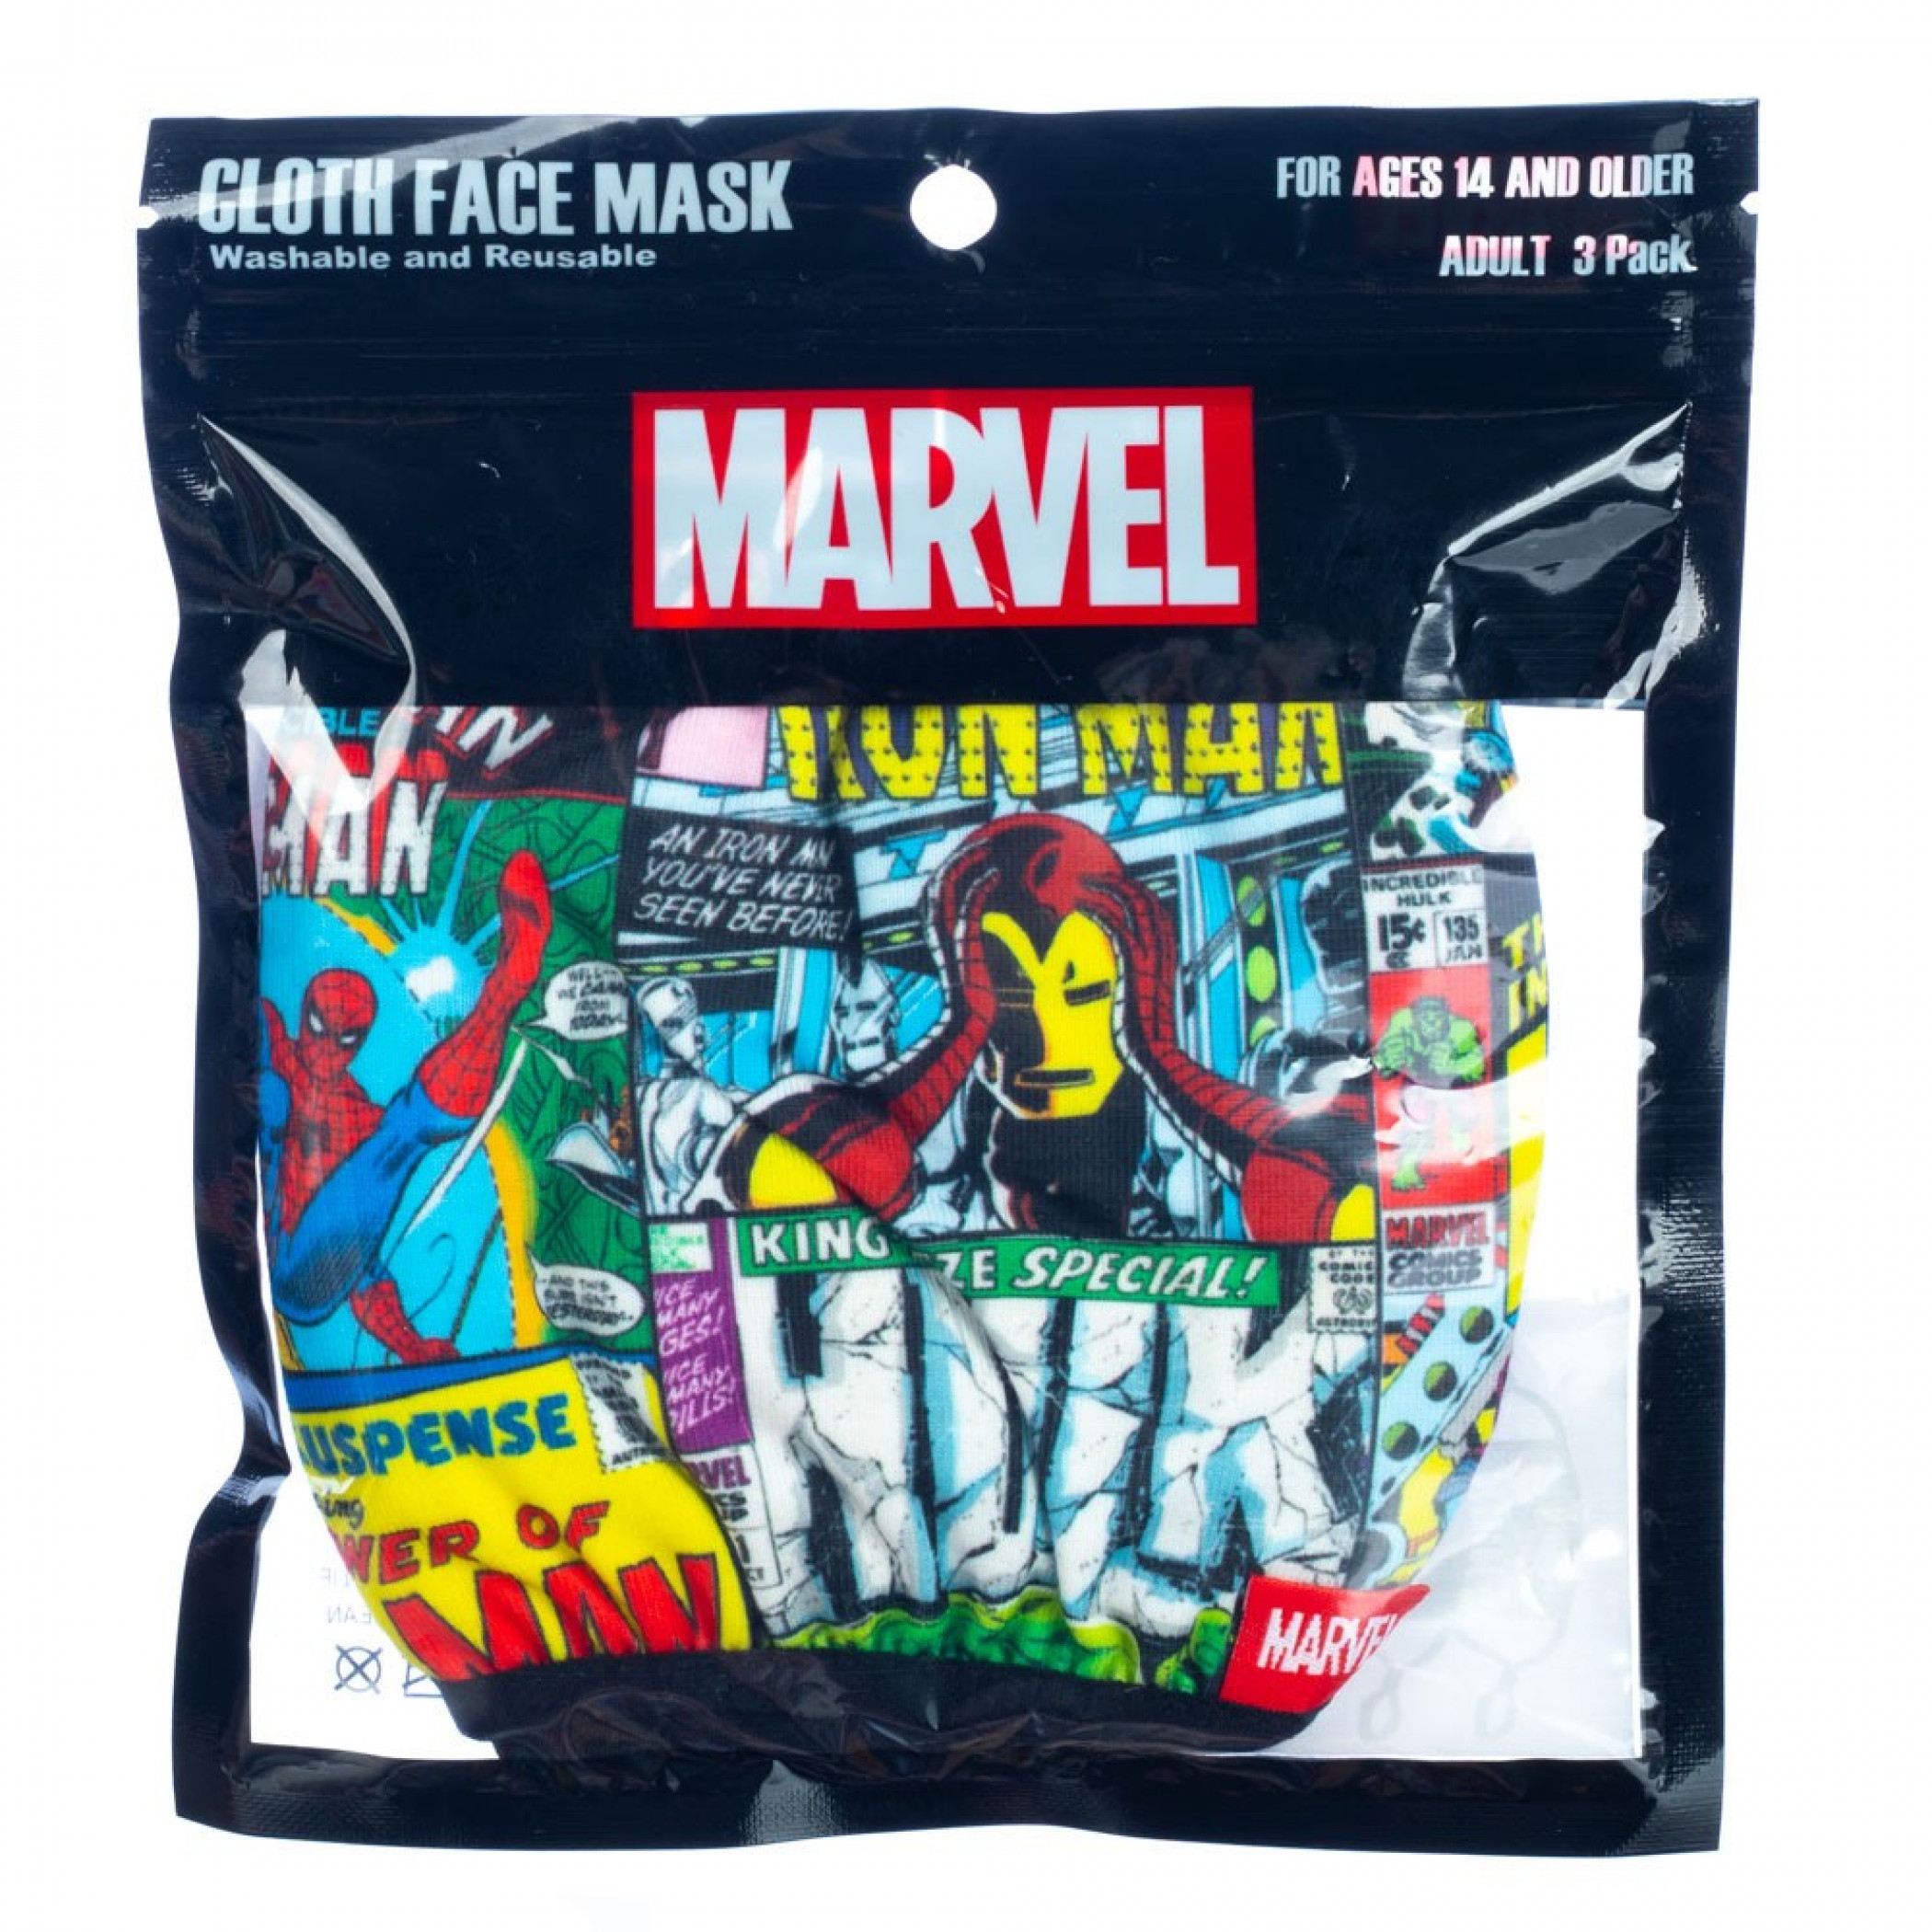 Marvel Comics and Brand 3-Pack of Reusable Adjustable Face Covers